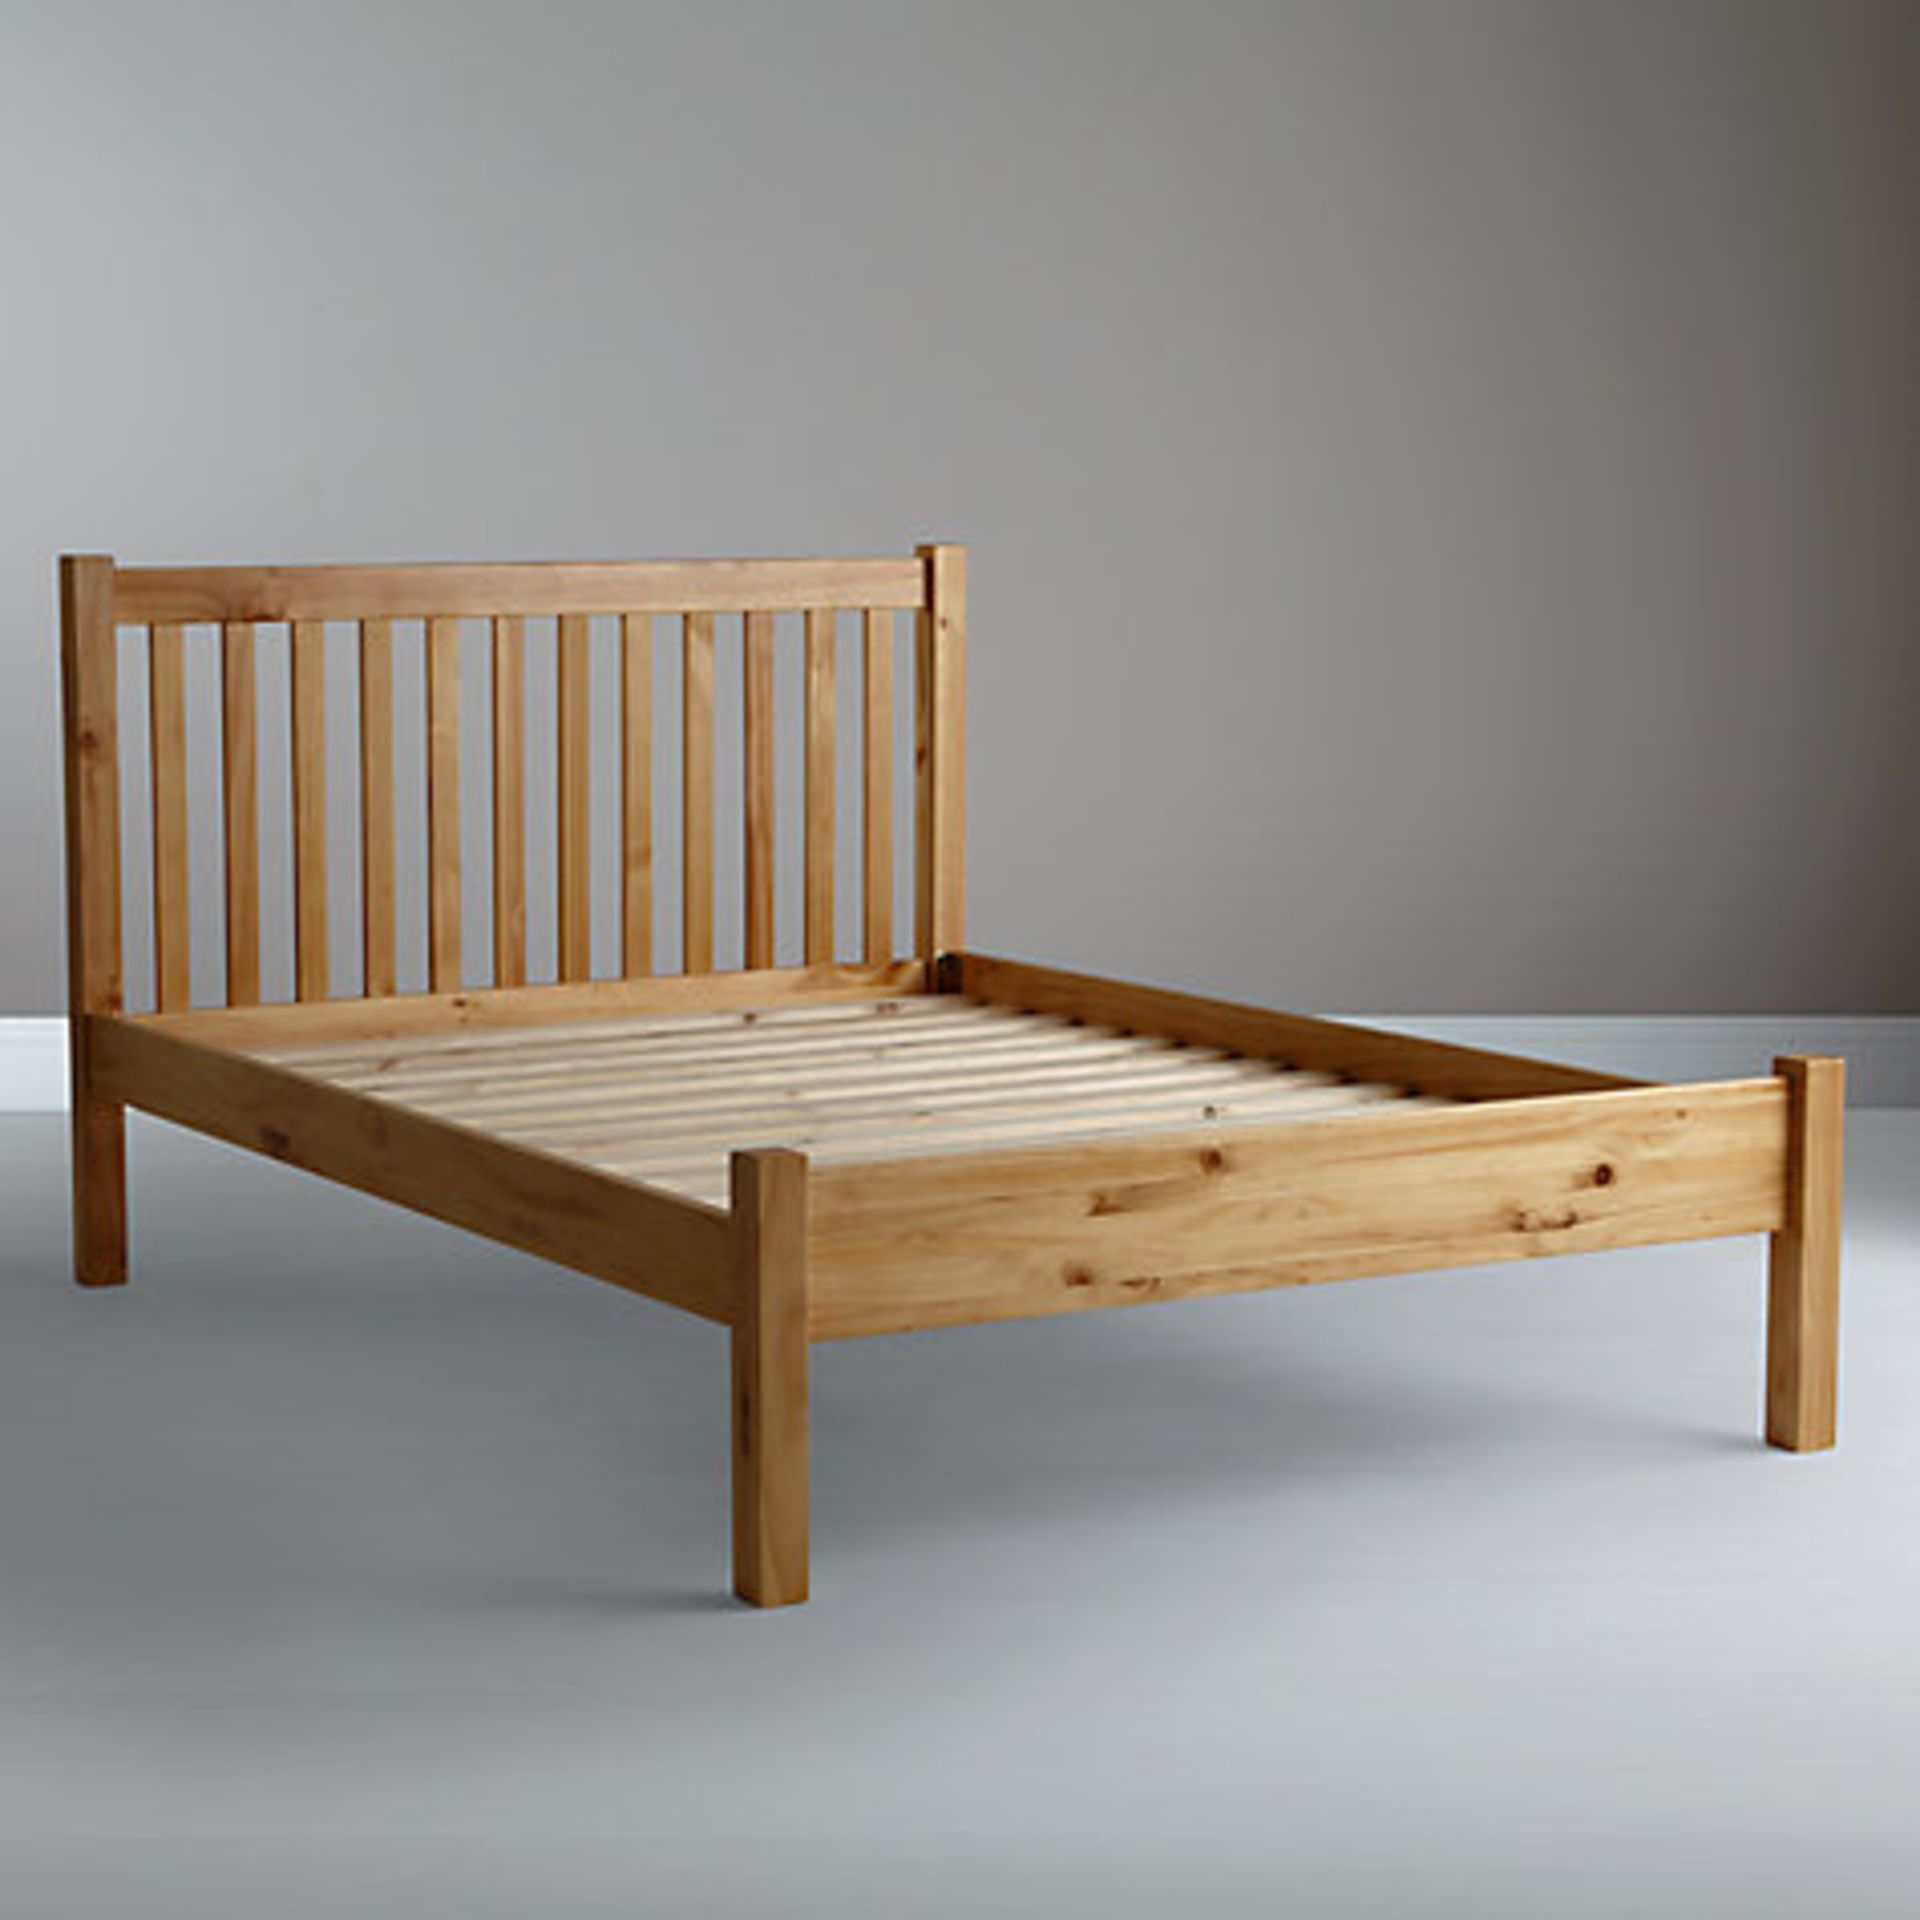 1 x BOXED WILTON PINE 150X200CM BEDSTEAD RRP£200 (7268)  *PLEASE NOTE THAT THE BID PRICE IS